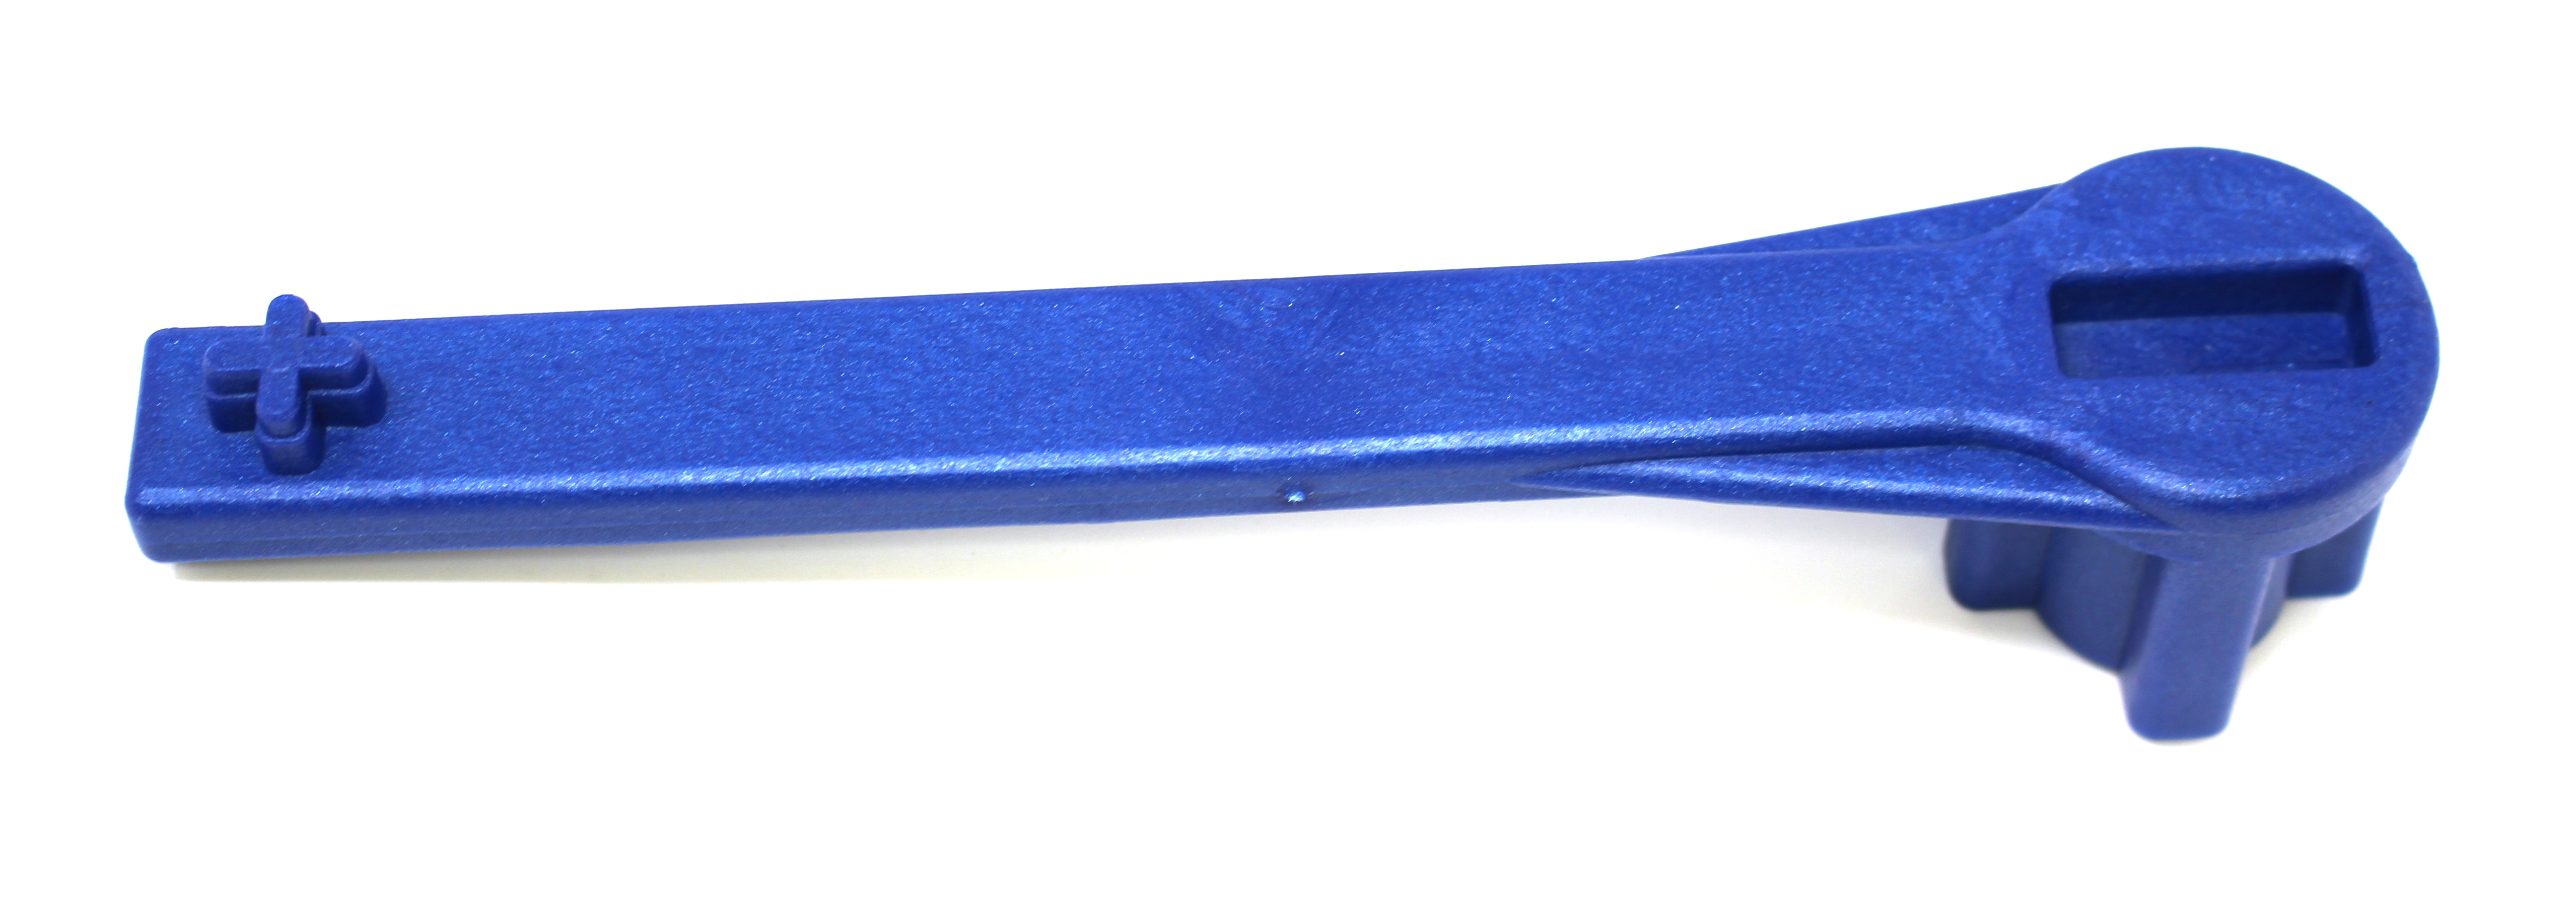 Gas and Bung Wrench Non Sparking Solid Drum Bung Nut Wrench (BLUE) - image 3 of 9